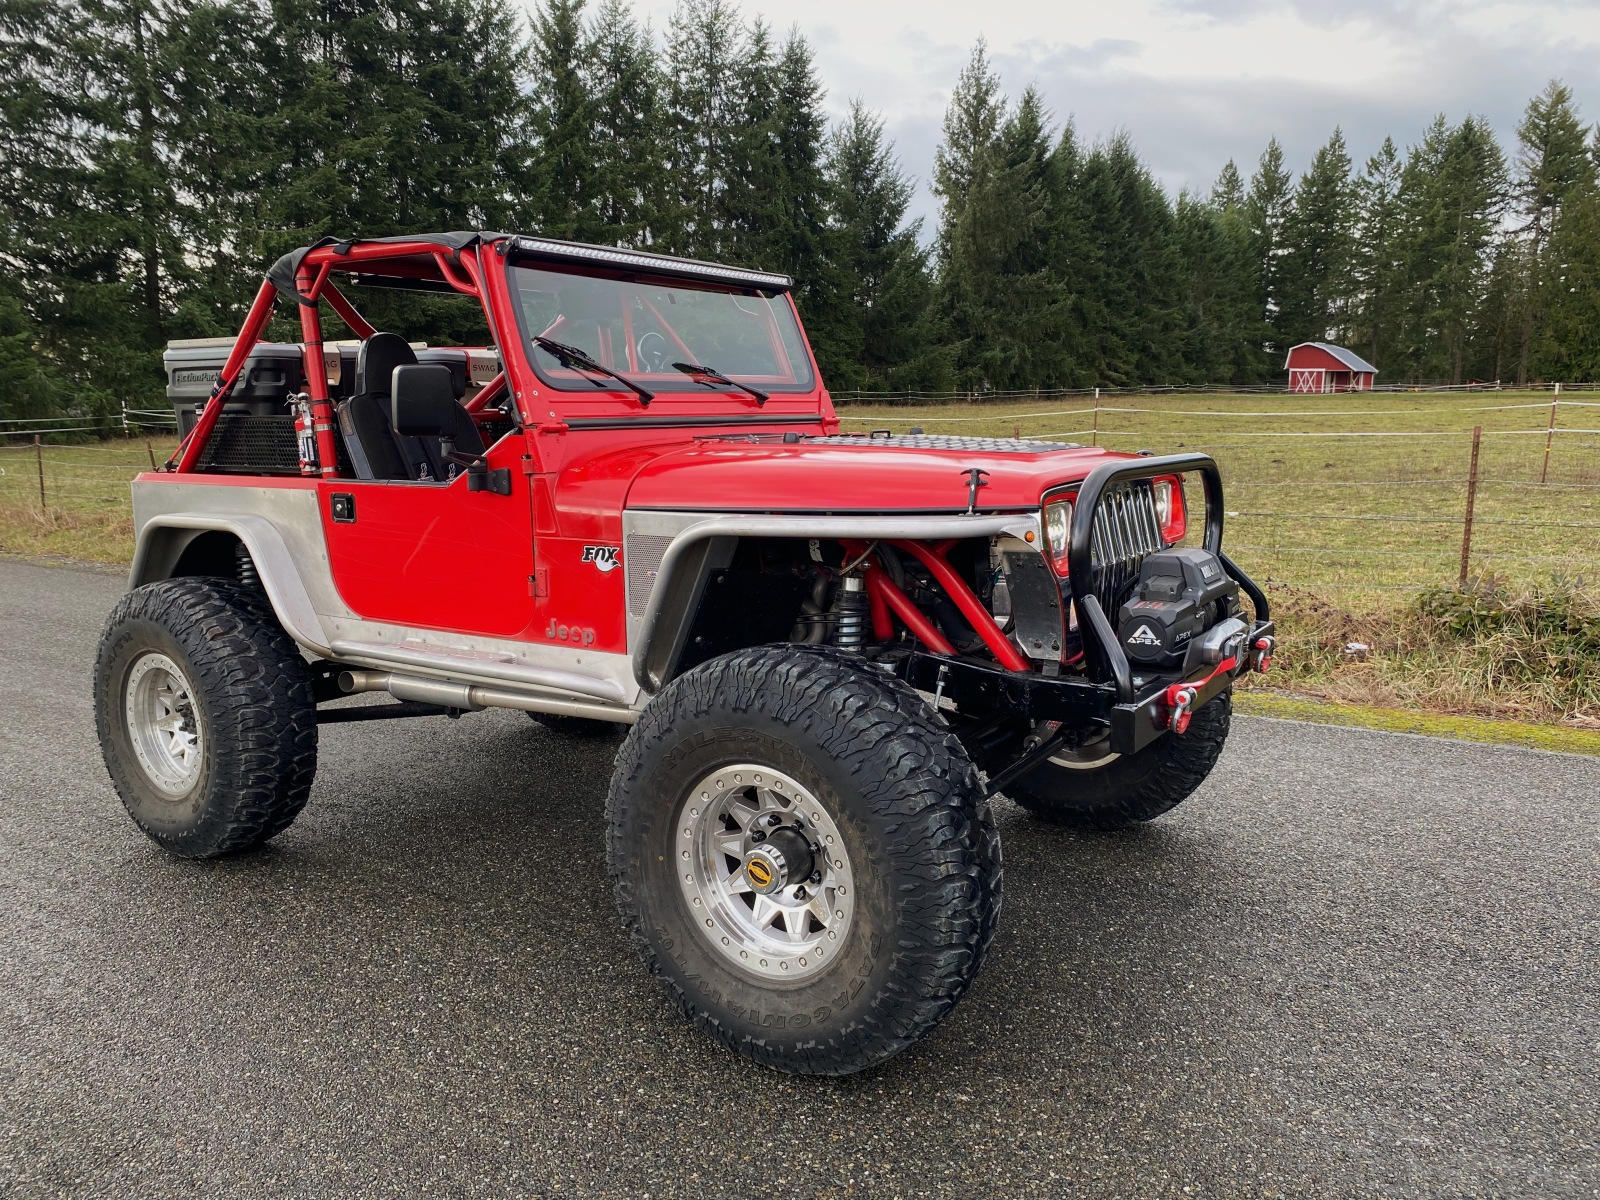 For Sale: Jeep Wrangler YJ with V8 and 1-ton Axles  - photo4